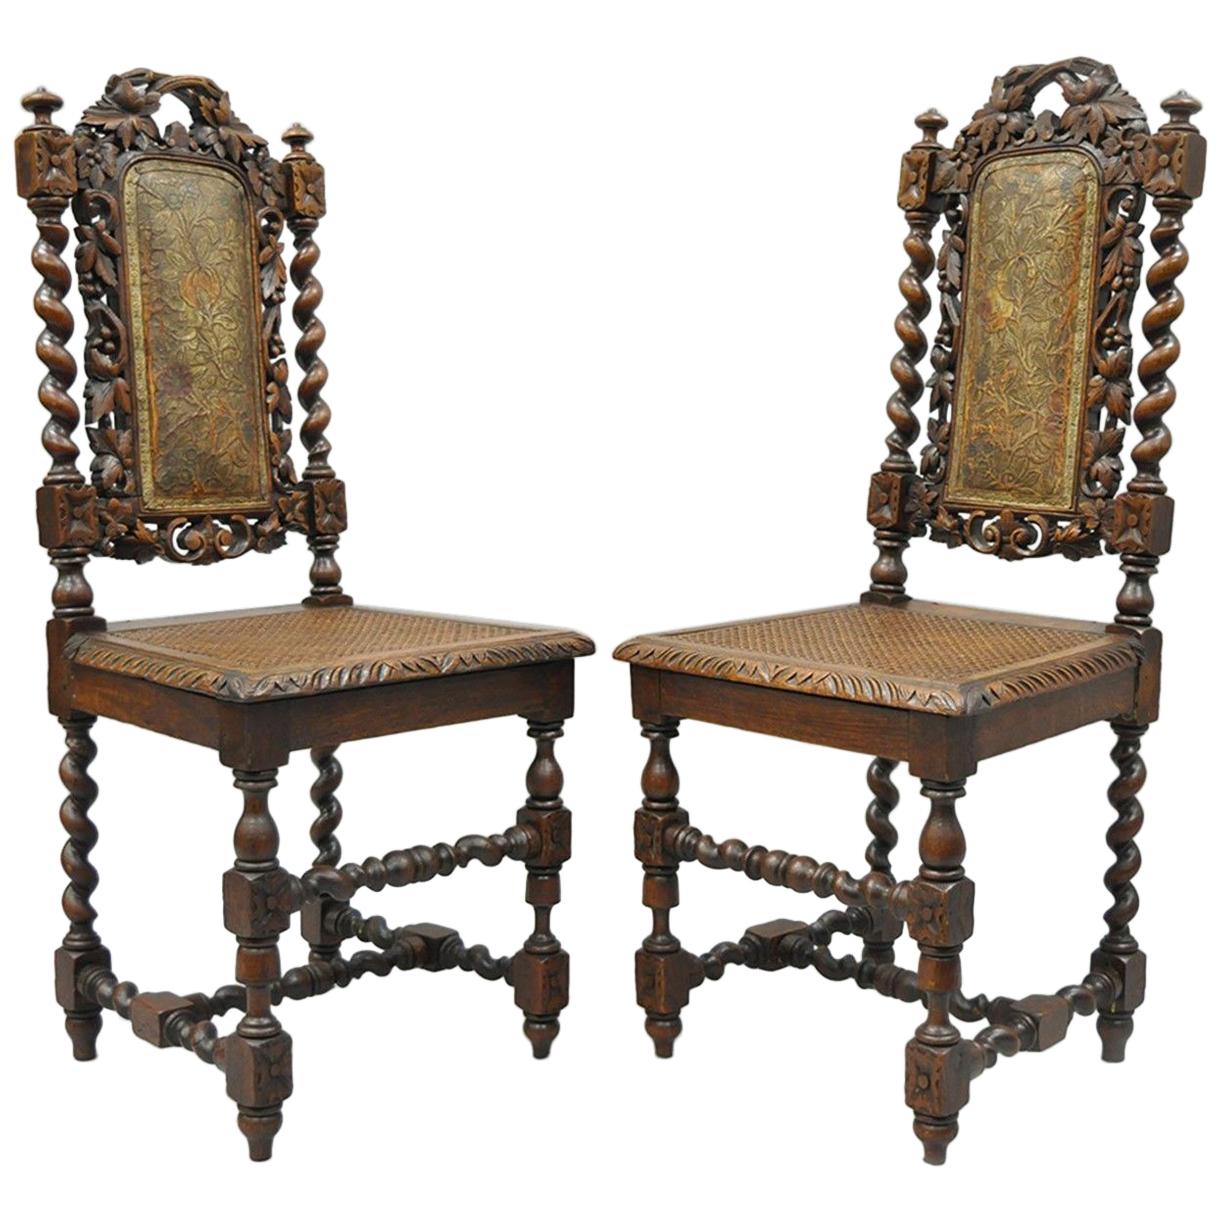 Pair of Renaissance Revival Carved Oakwood Black Forest Barley Twist Cane Chairs